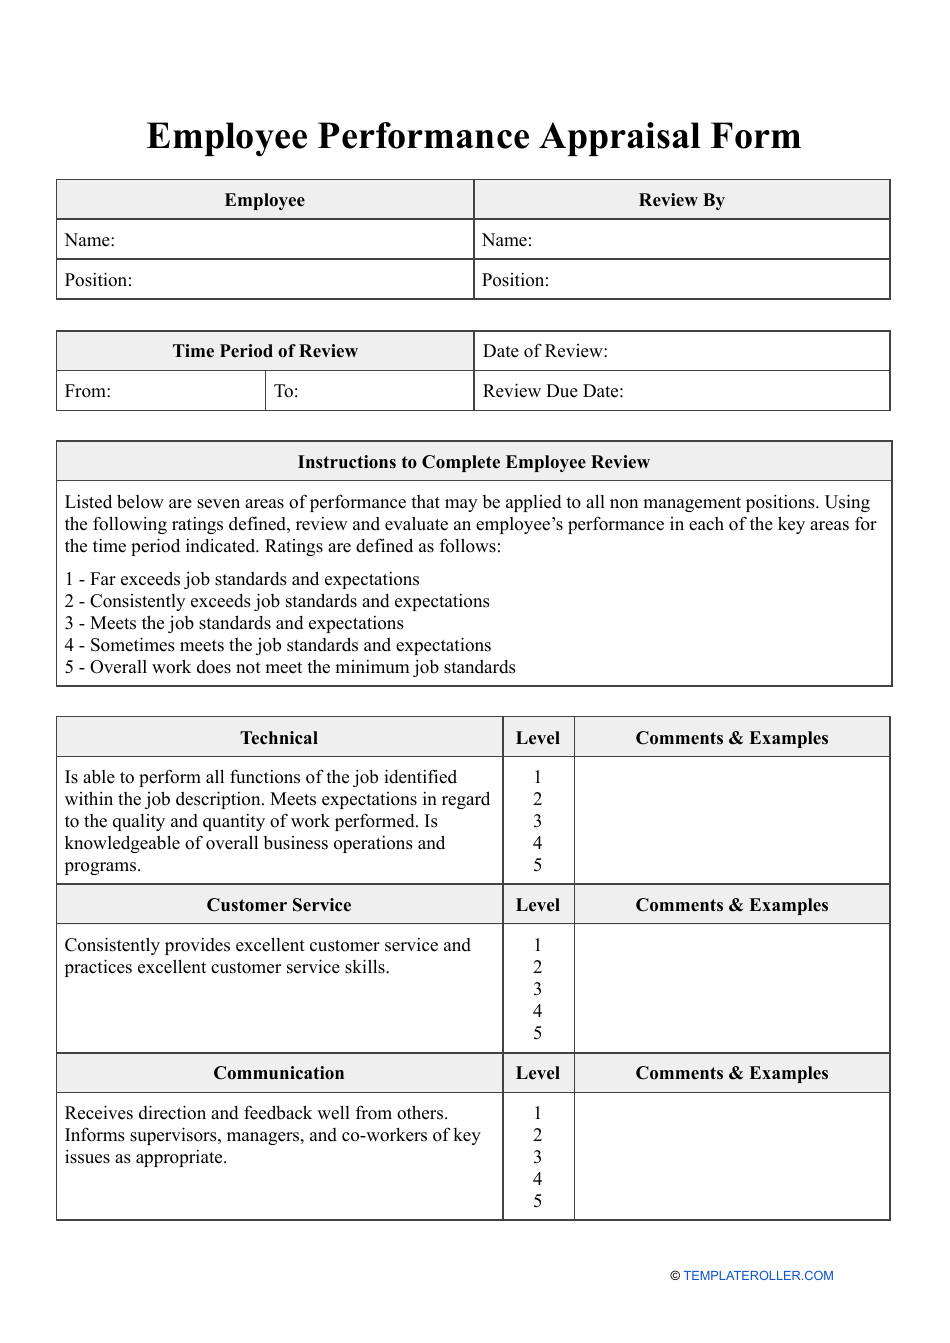 Employee Performance Appraisal Form - Levels, Page 1